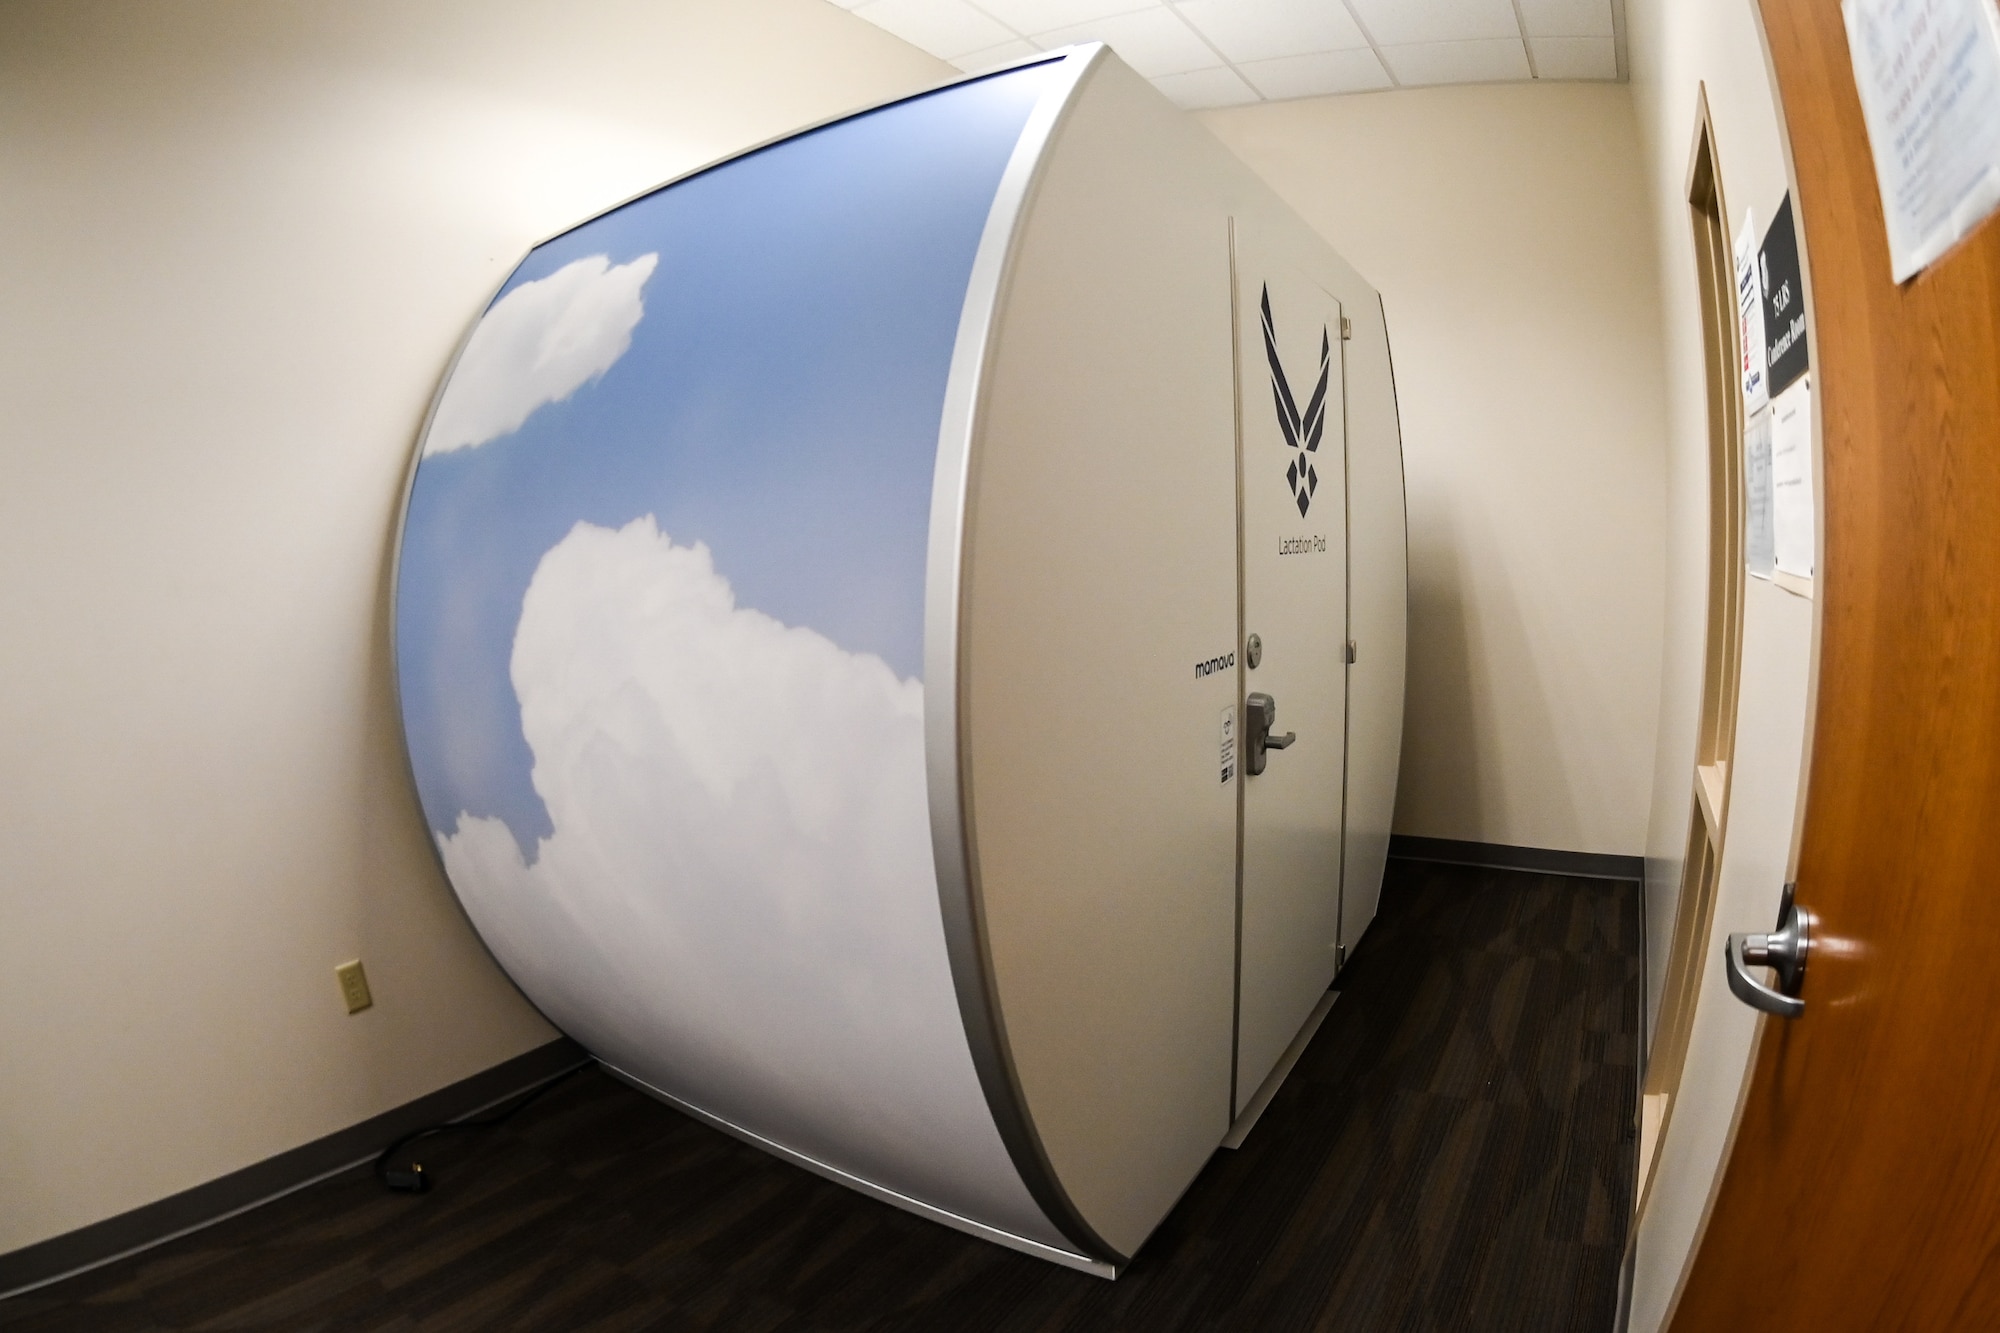 A new lactation pod, pictured here June 28, 2021, for nursing mothers is now located at building 430 at Hill Air Force Base, Utah. The pod features two comfortable benches, wall outlets and a locked door to ensure privacy and will be open during building 430 working hours. (U.S. Air Force photo by Cynthia Griggs)